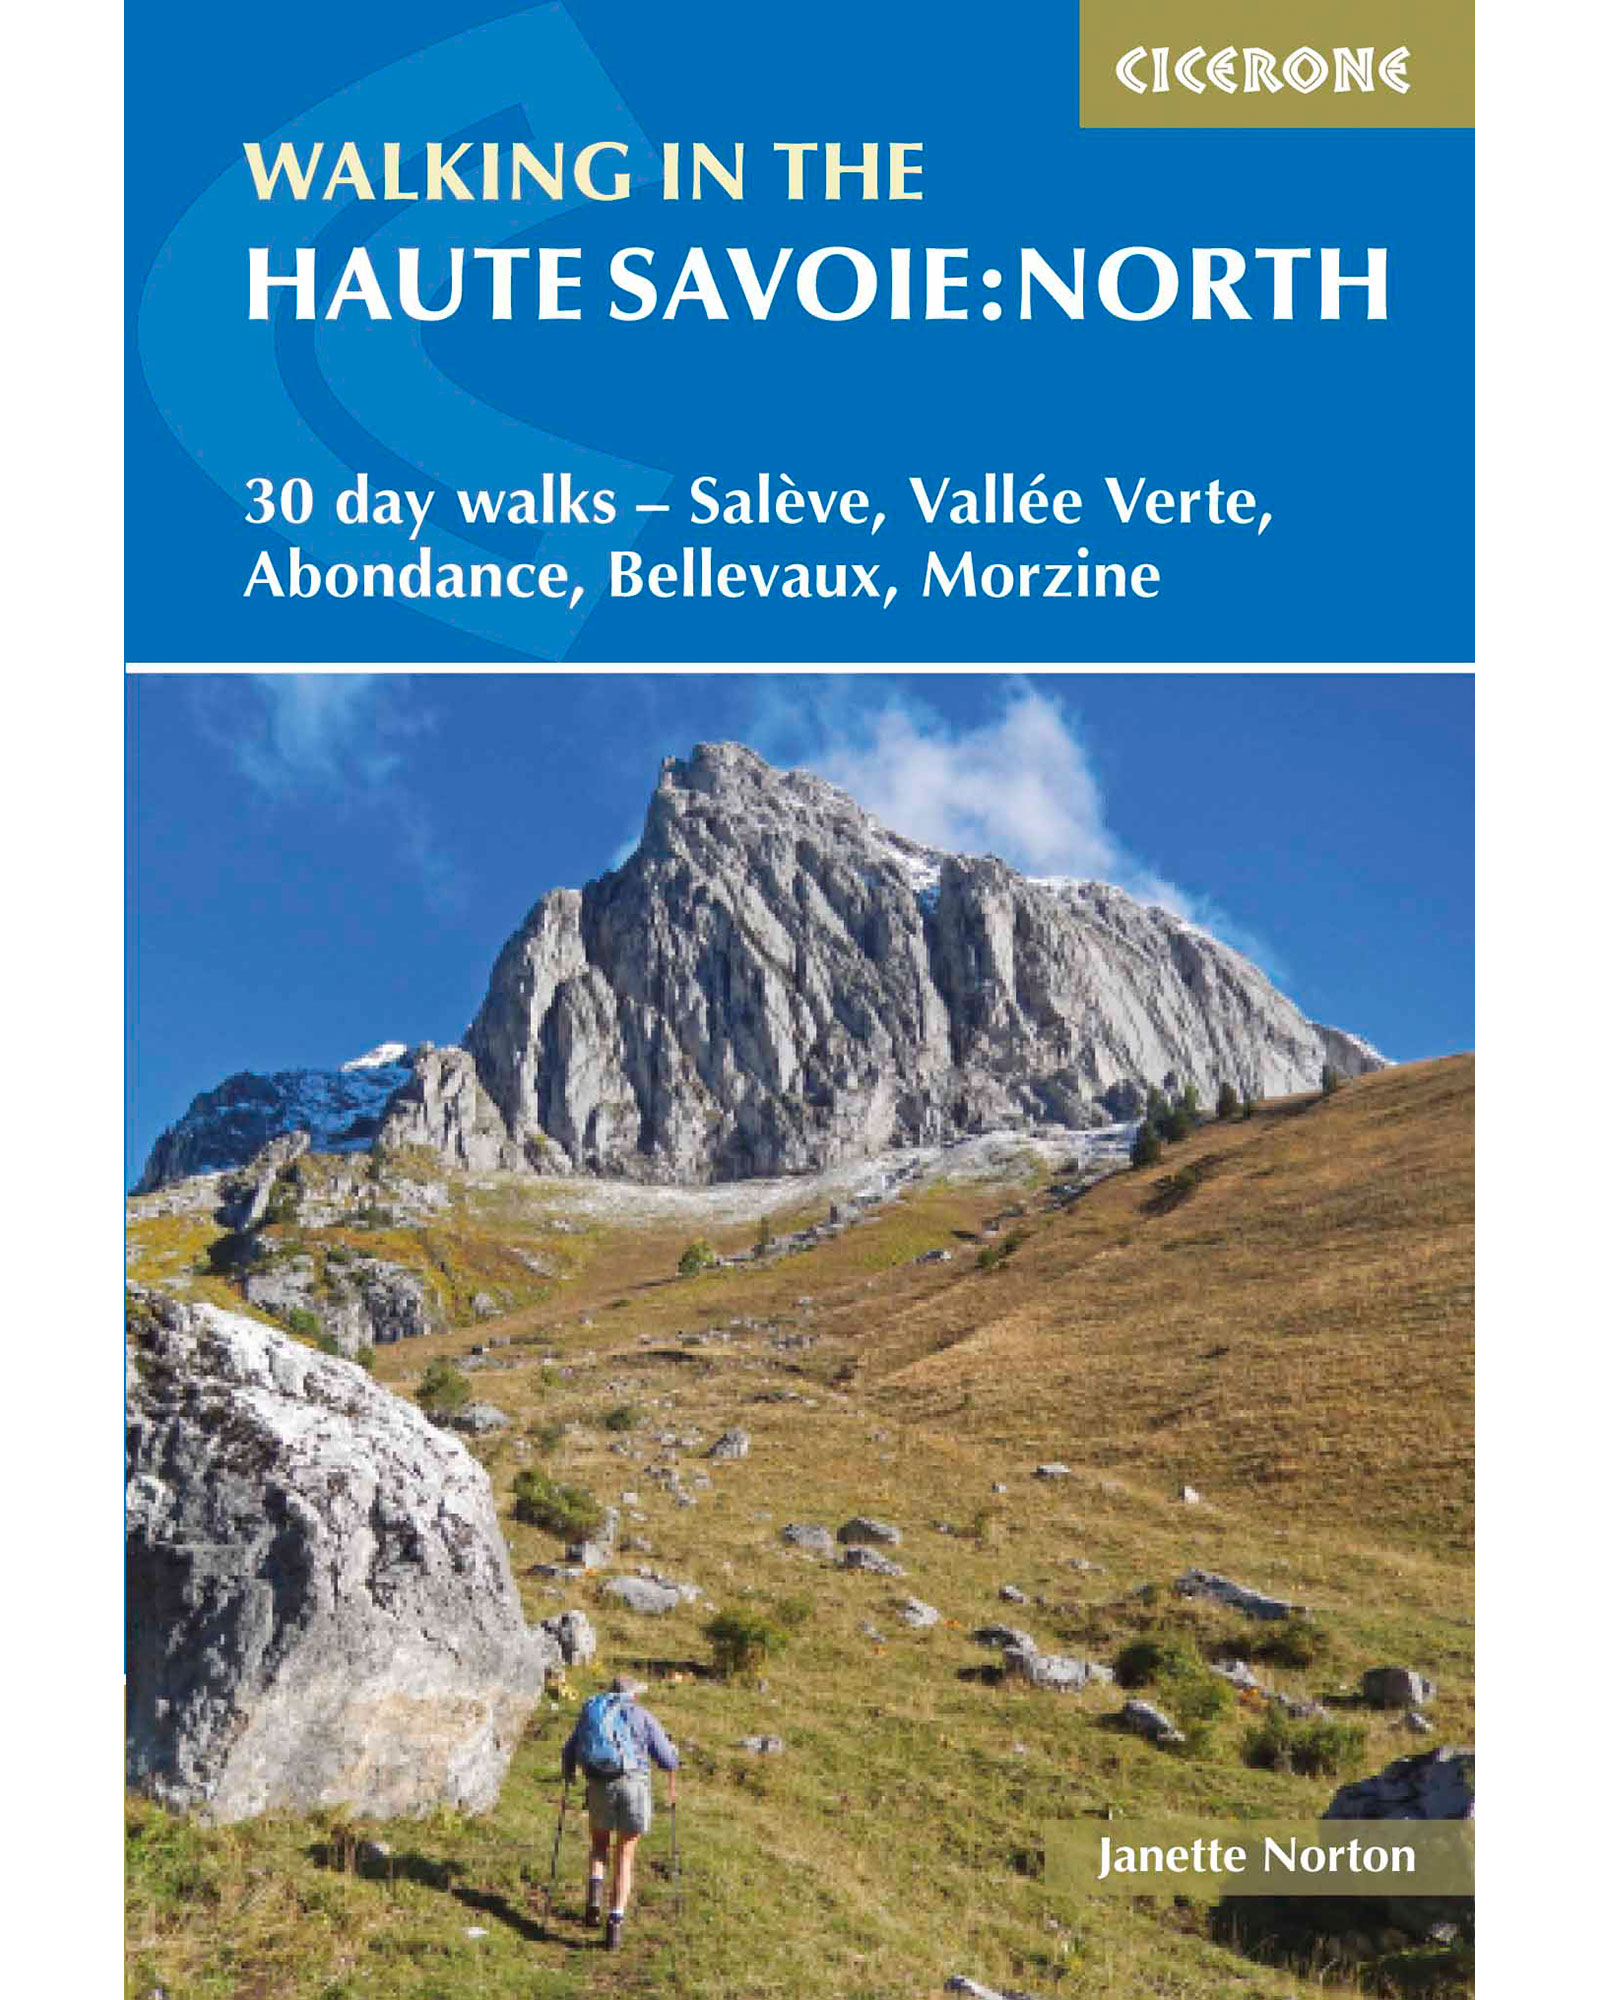 Cicerone Walking in the Haute Savoie: North Guide Book